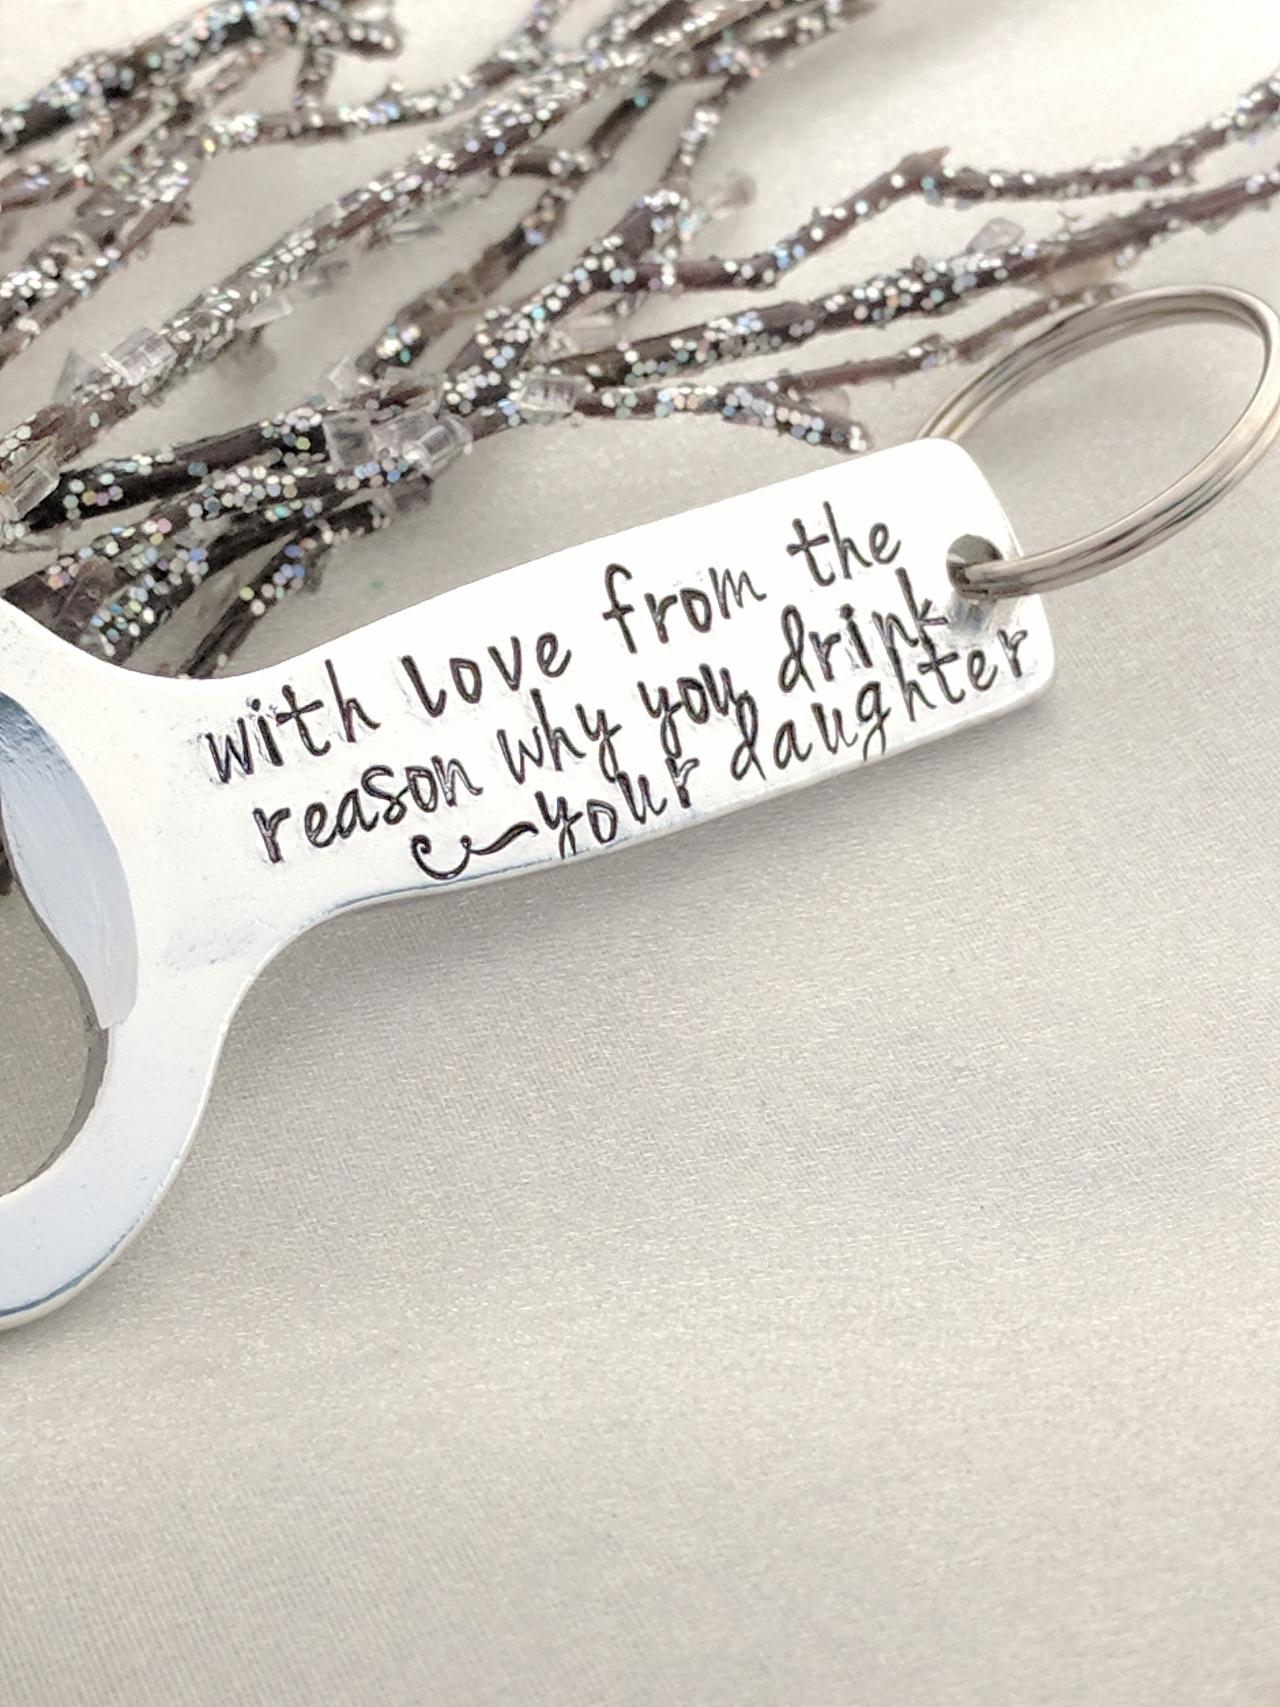 Father's Day, Personalized Gift For Dad, With Love From The Reason Why You Drink, Anniversary Gift, Gift For Him, Bottle Opener, Fun